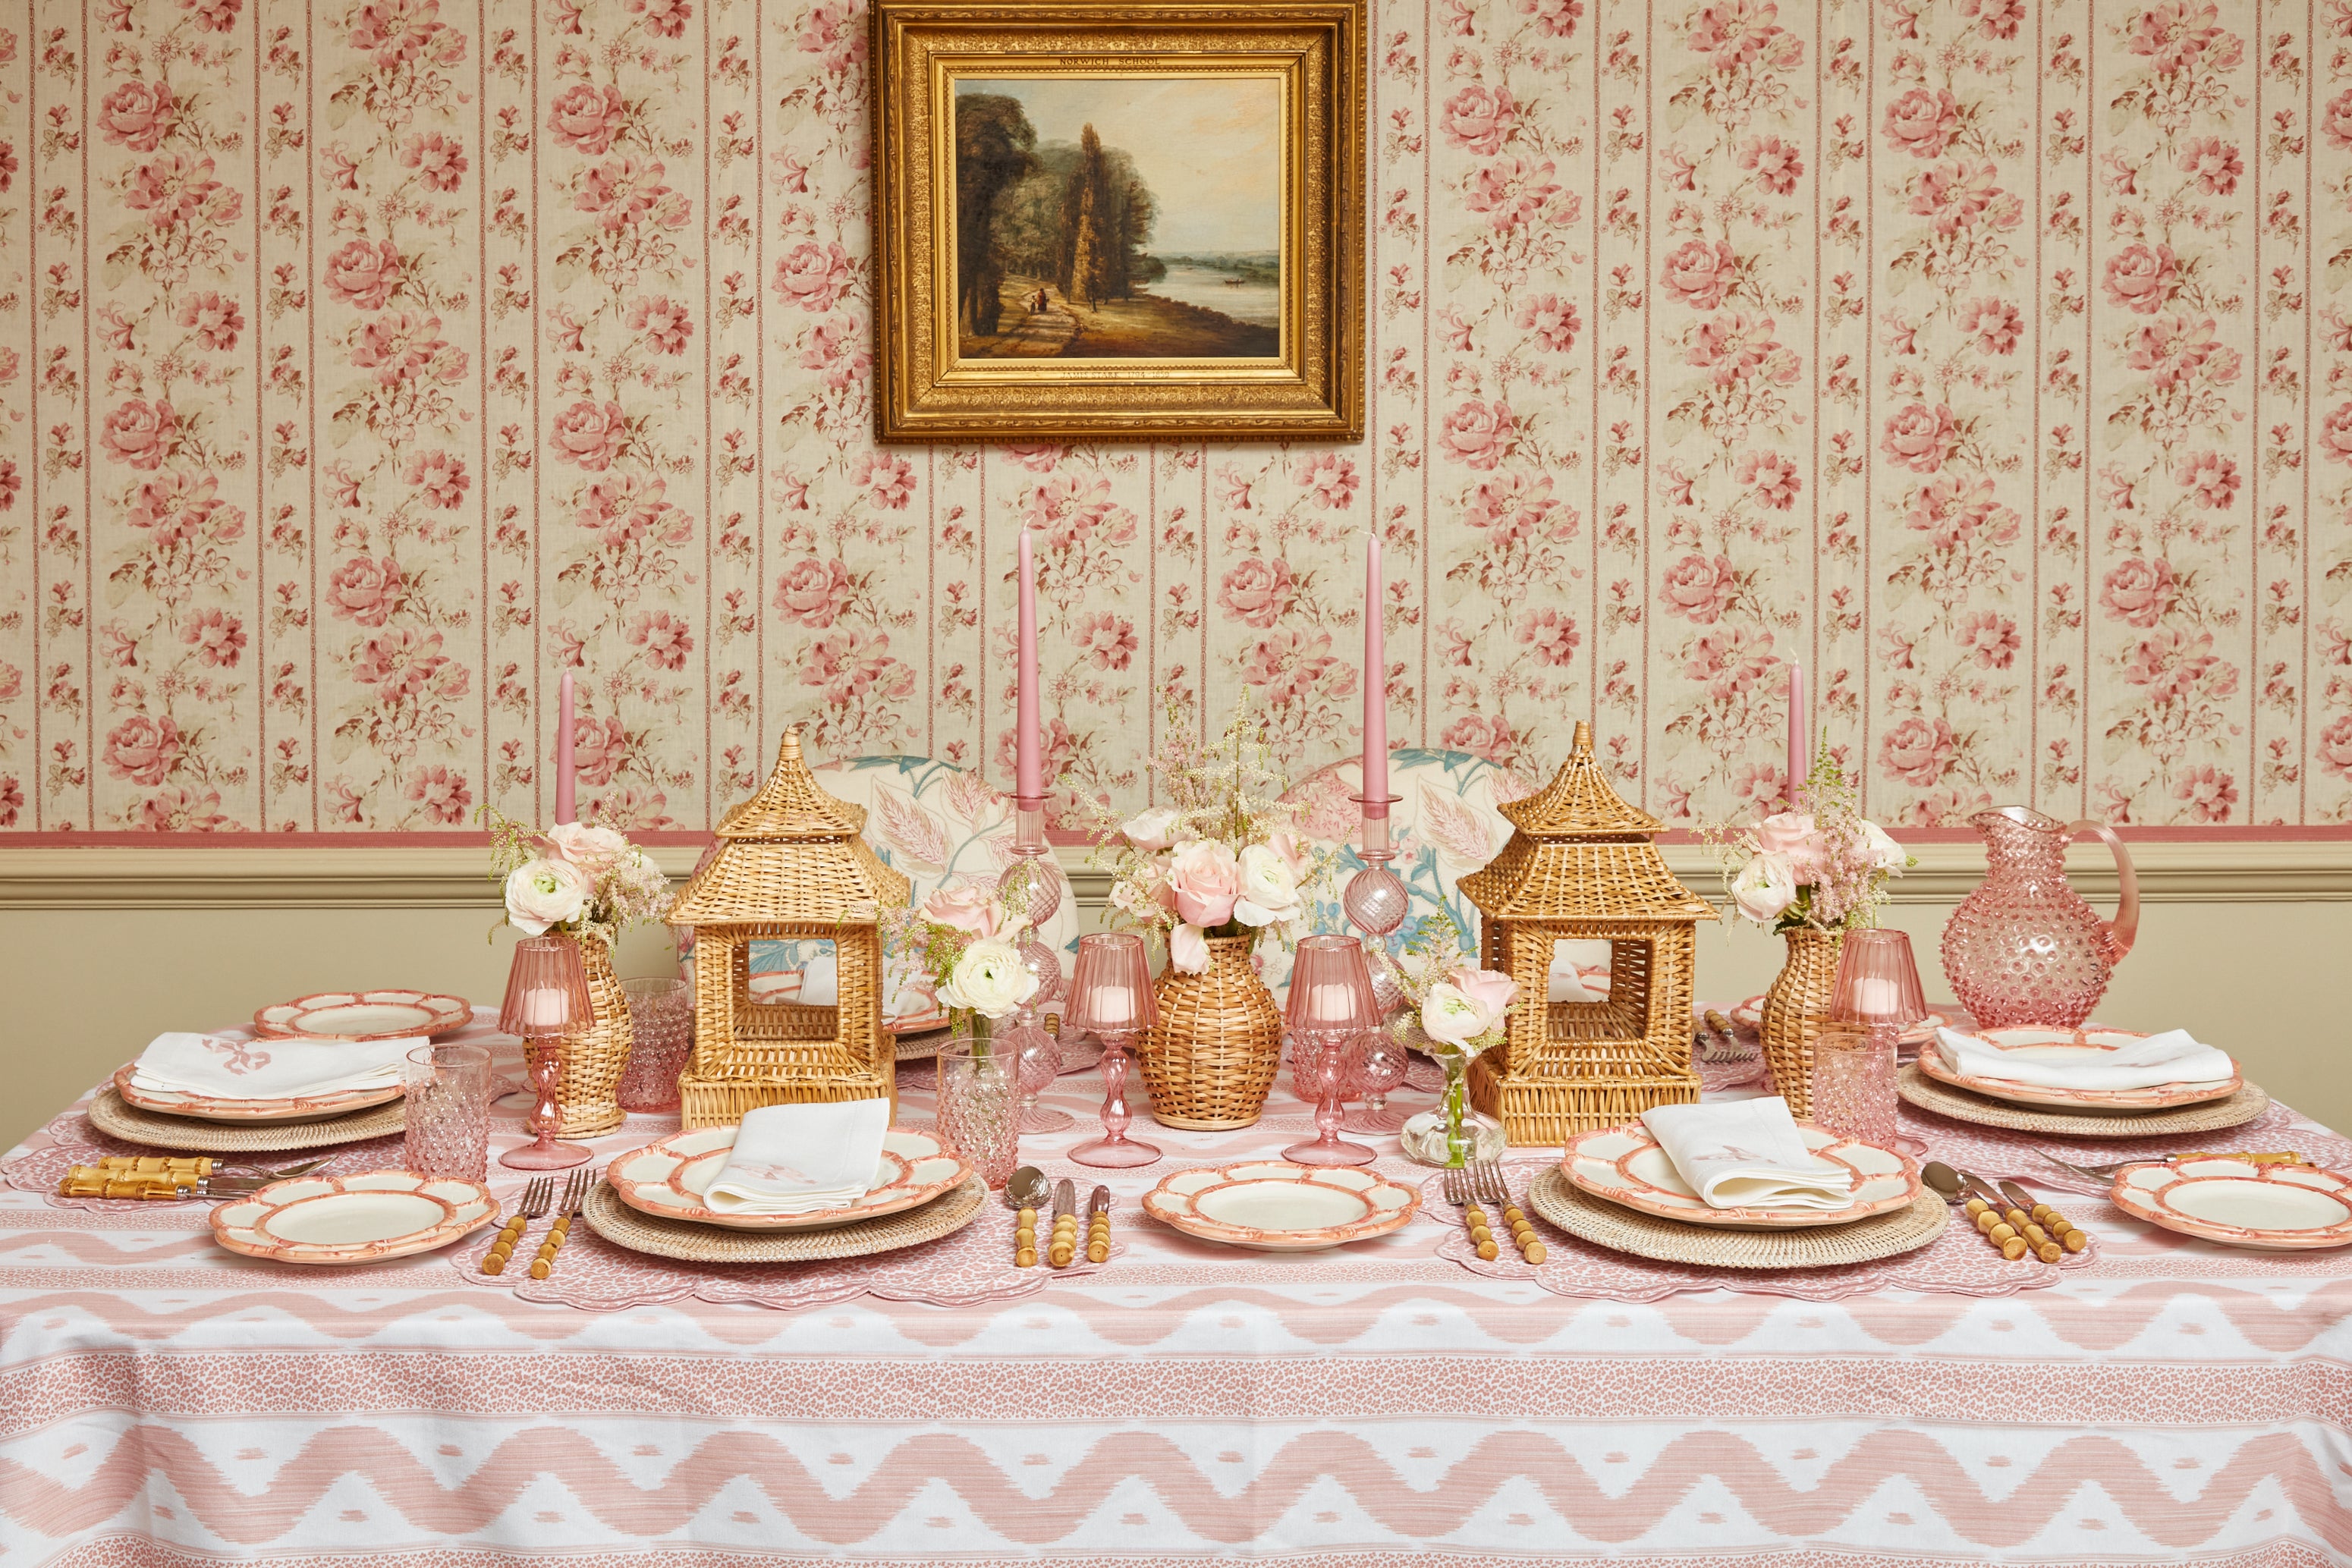 Think pink: a beautiful tablescape is the perfect way to elevate a meal